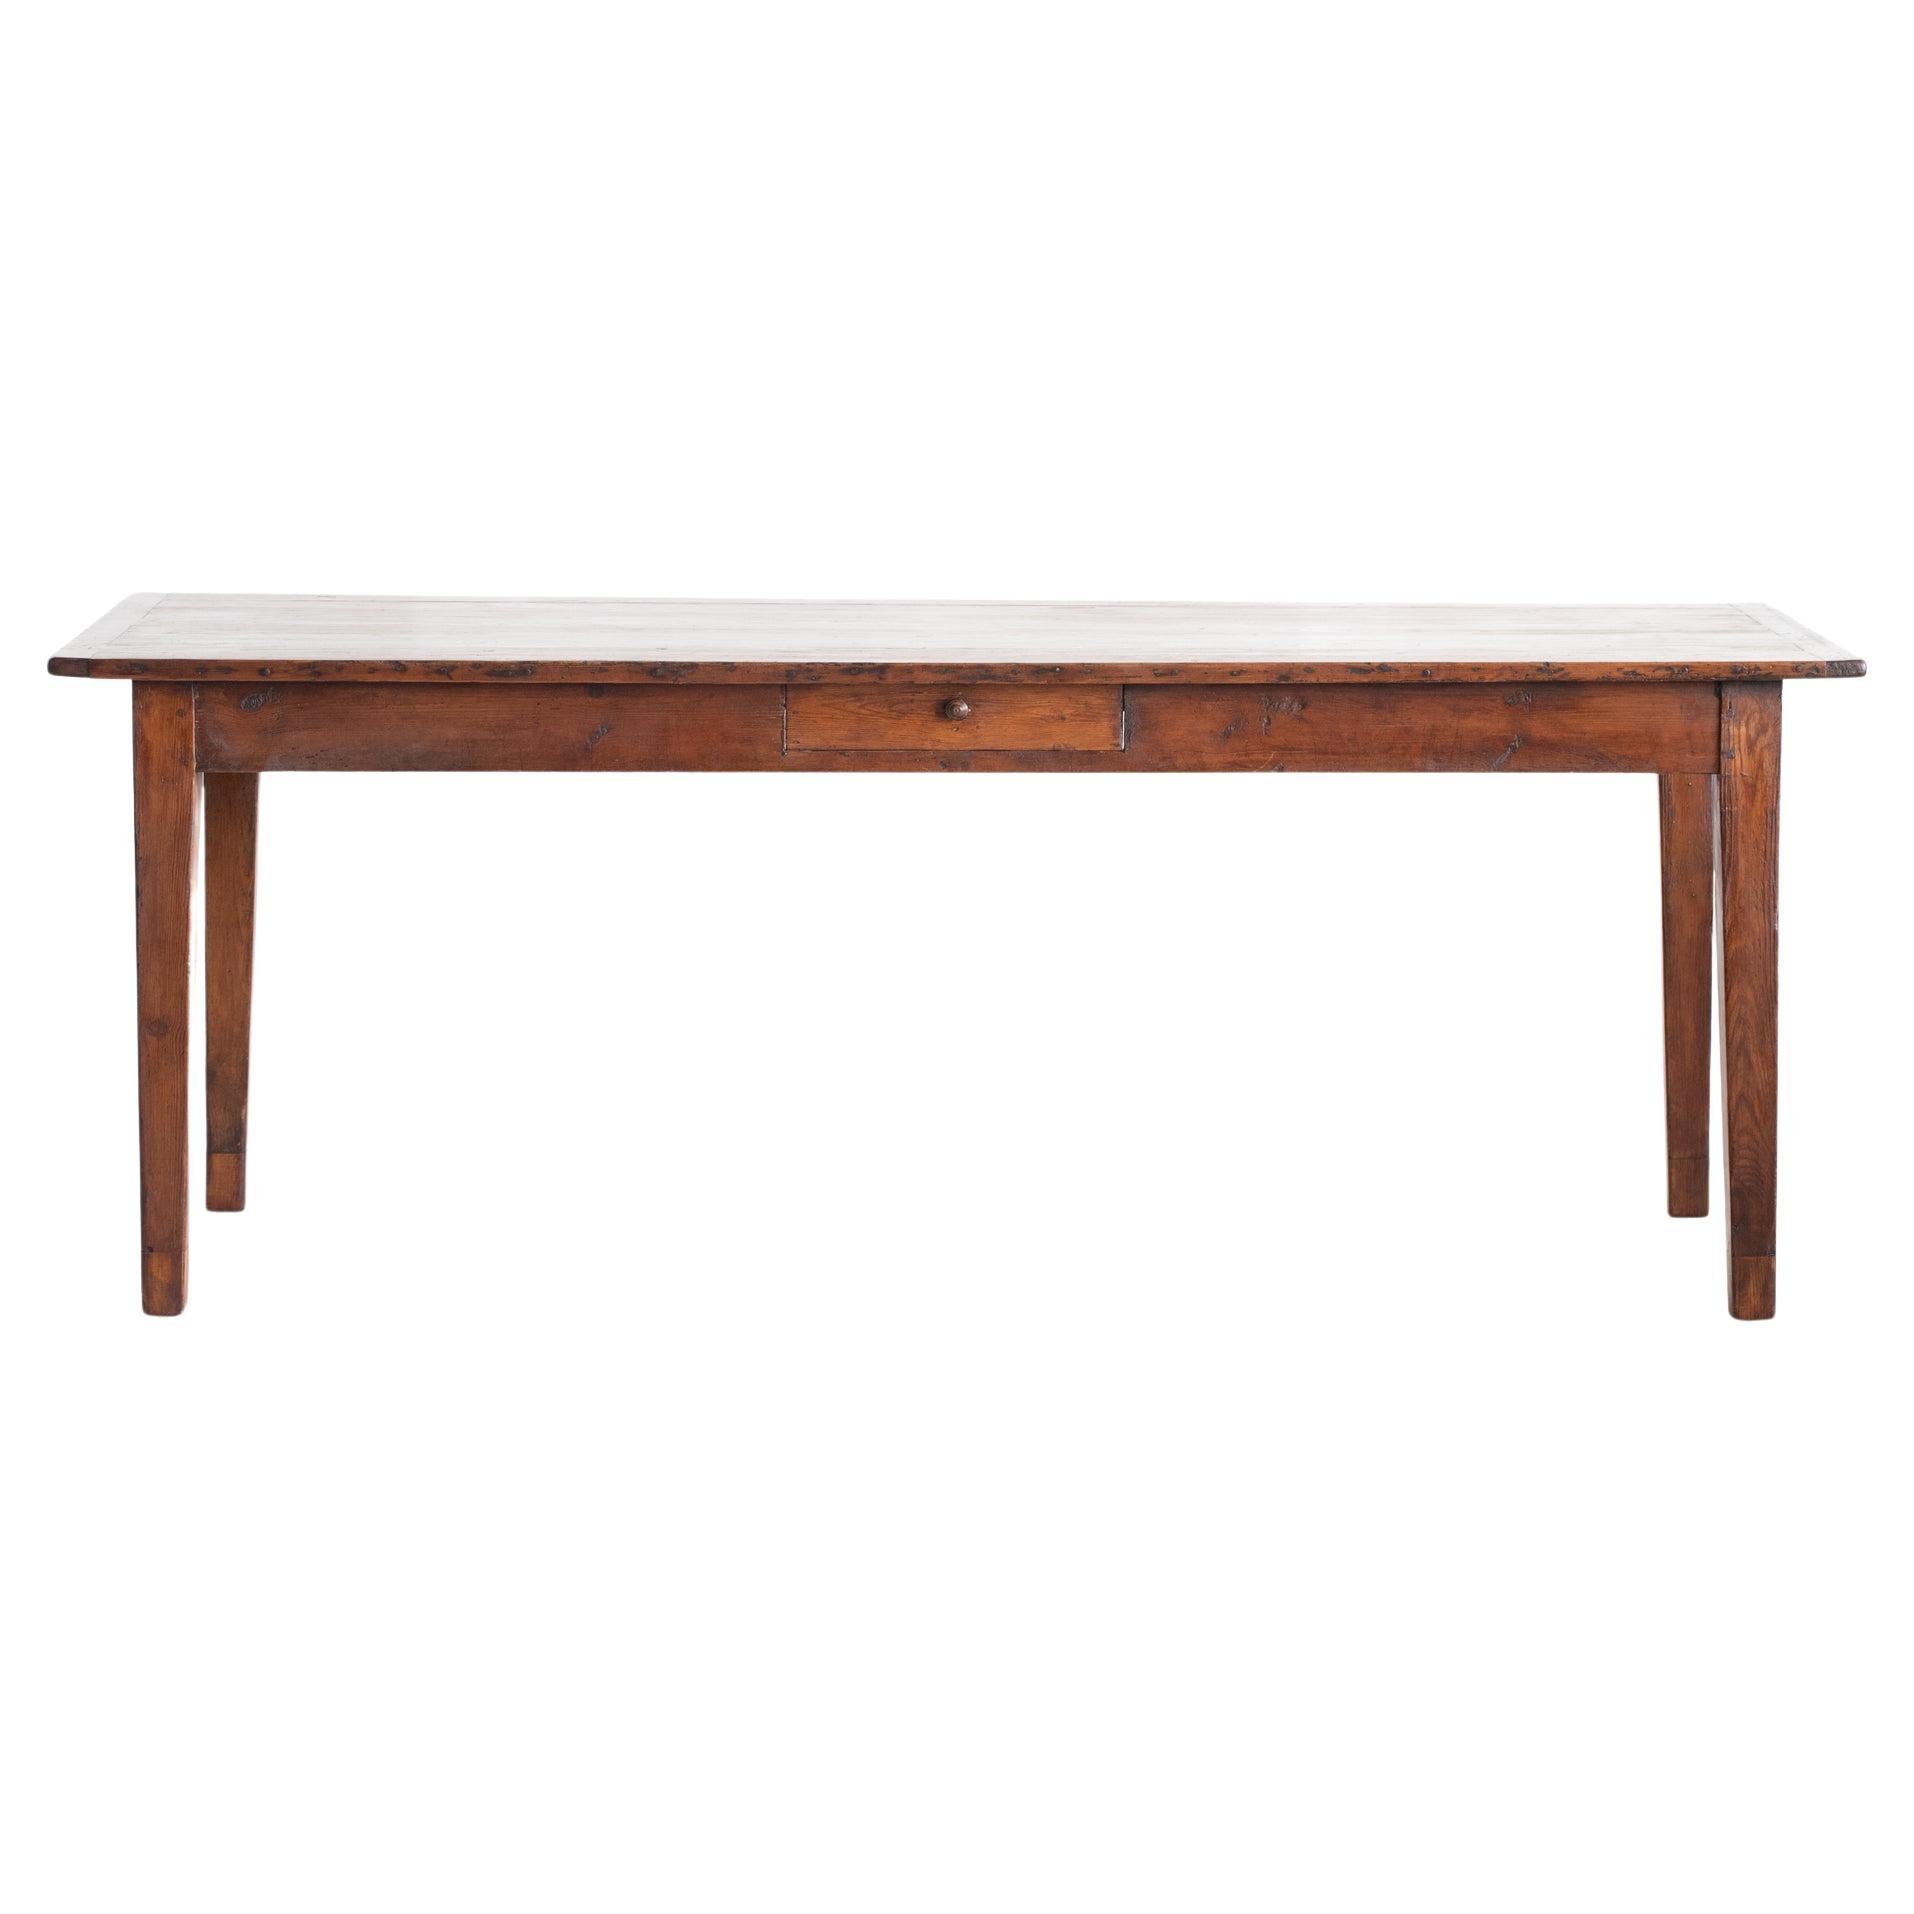 Early 20th Century French Pine Farmhouse Table